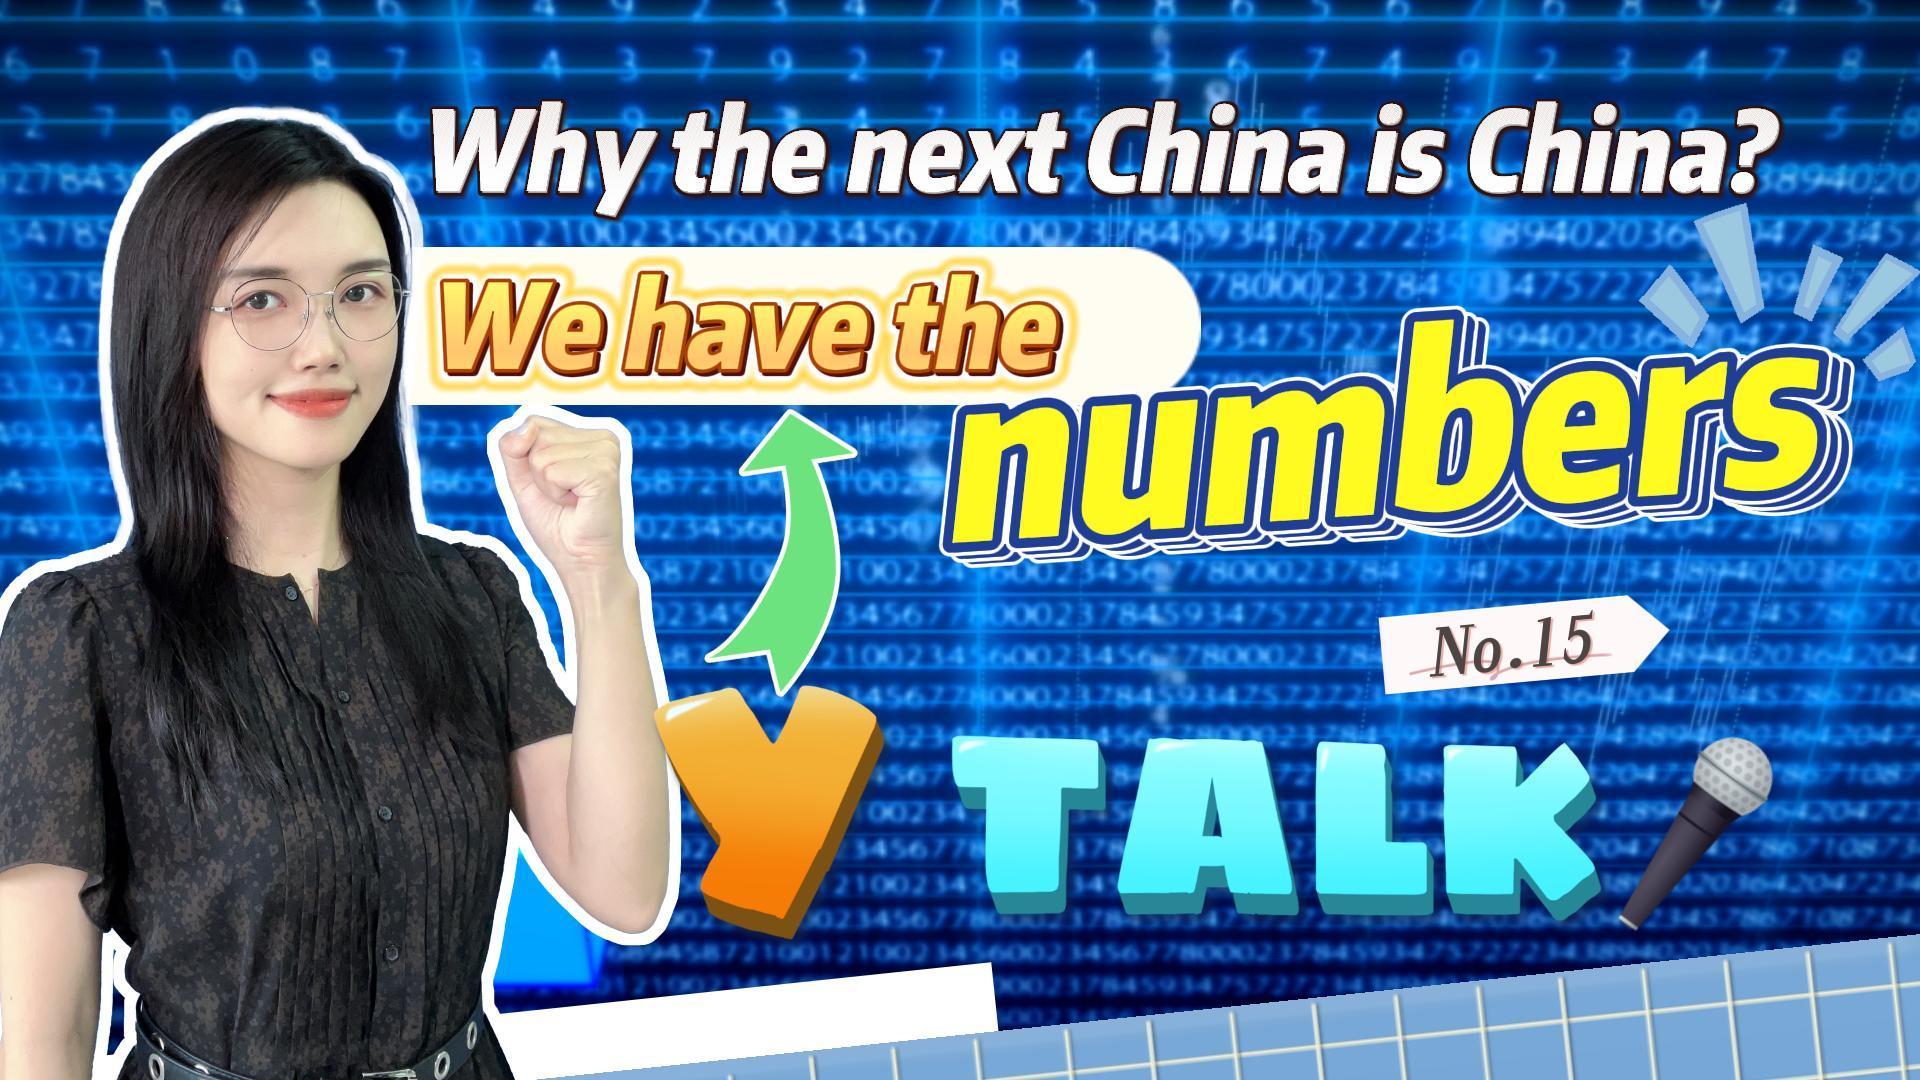 ​Y Talk⑮｜Why the next China is China? We have the numbers 经济数据告诉你，为何世界仍需看好中国